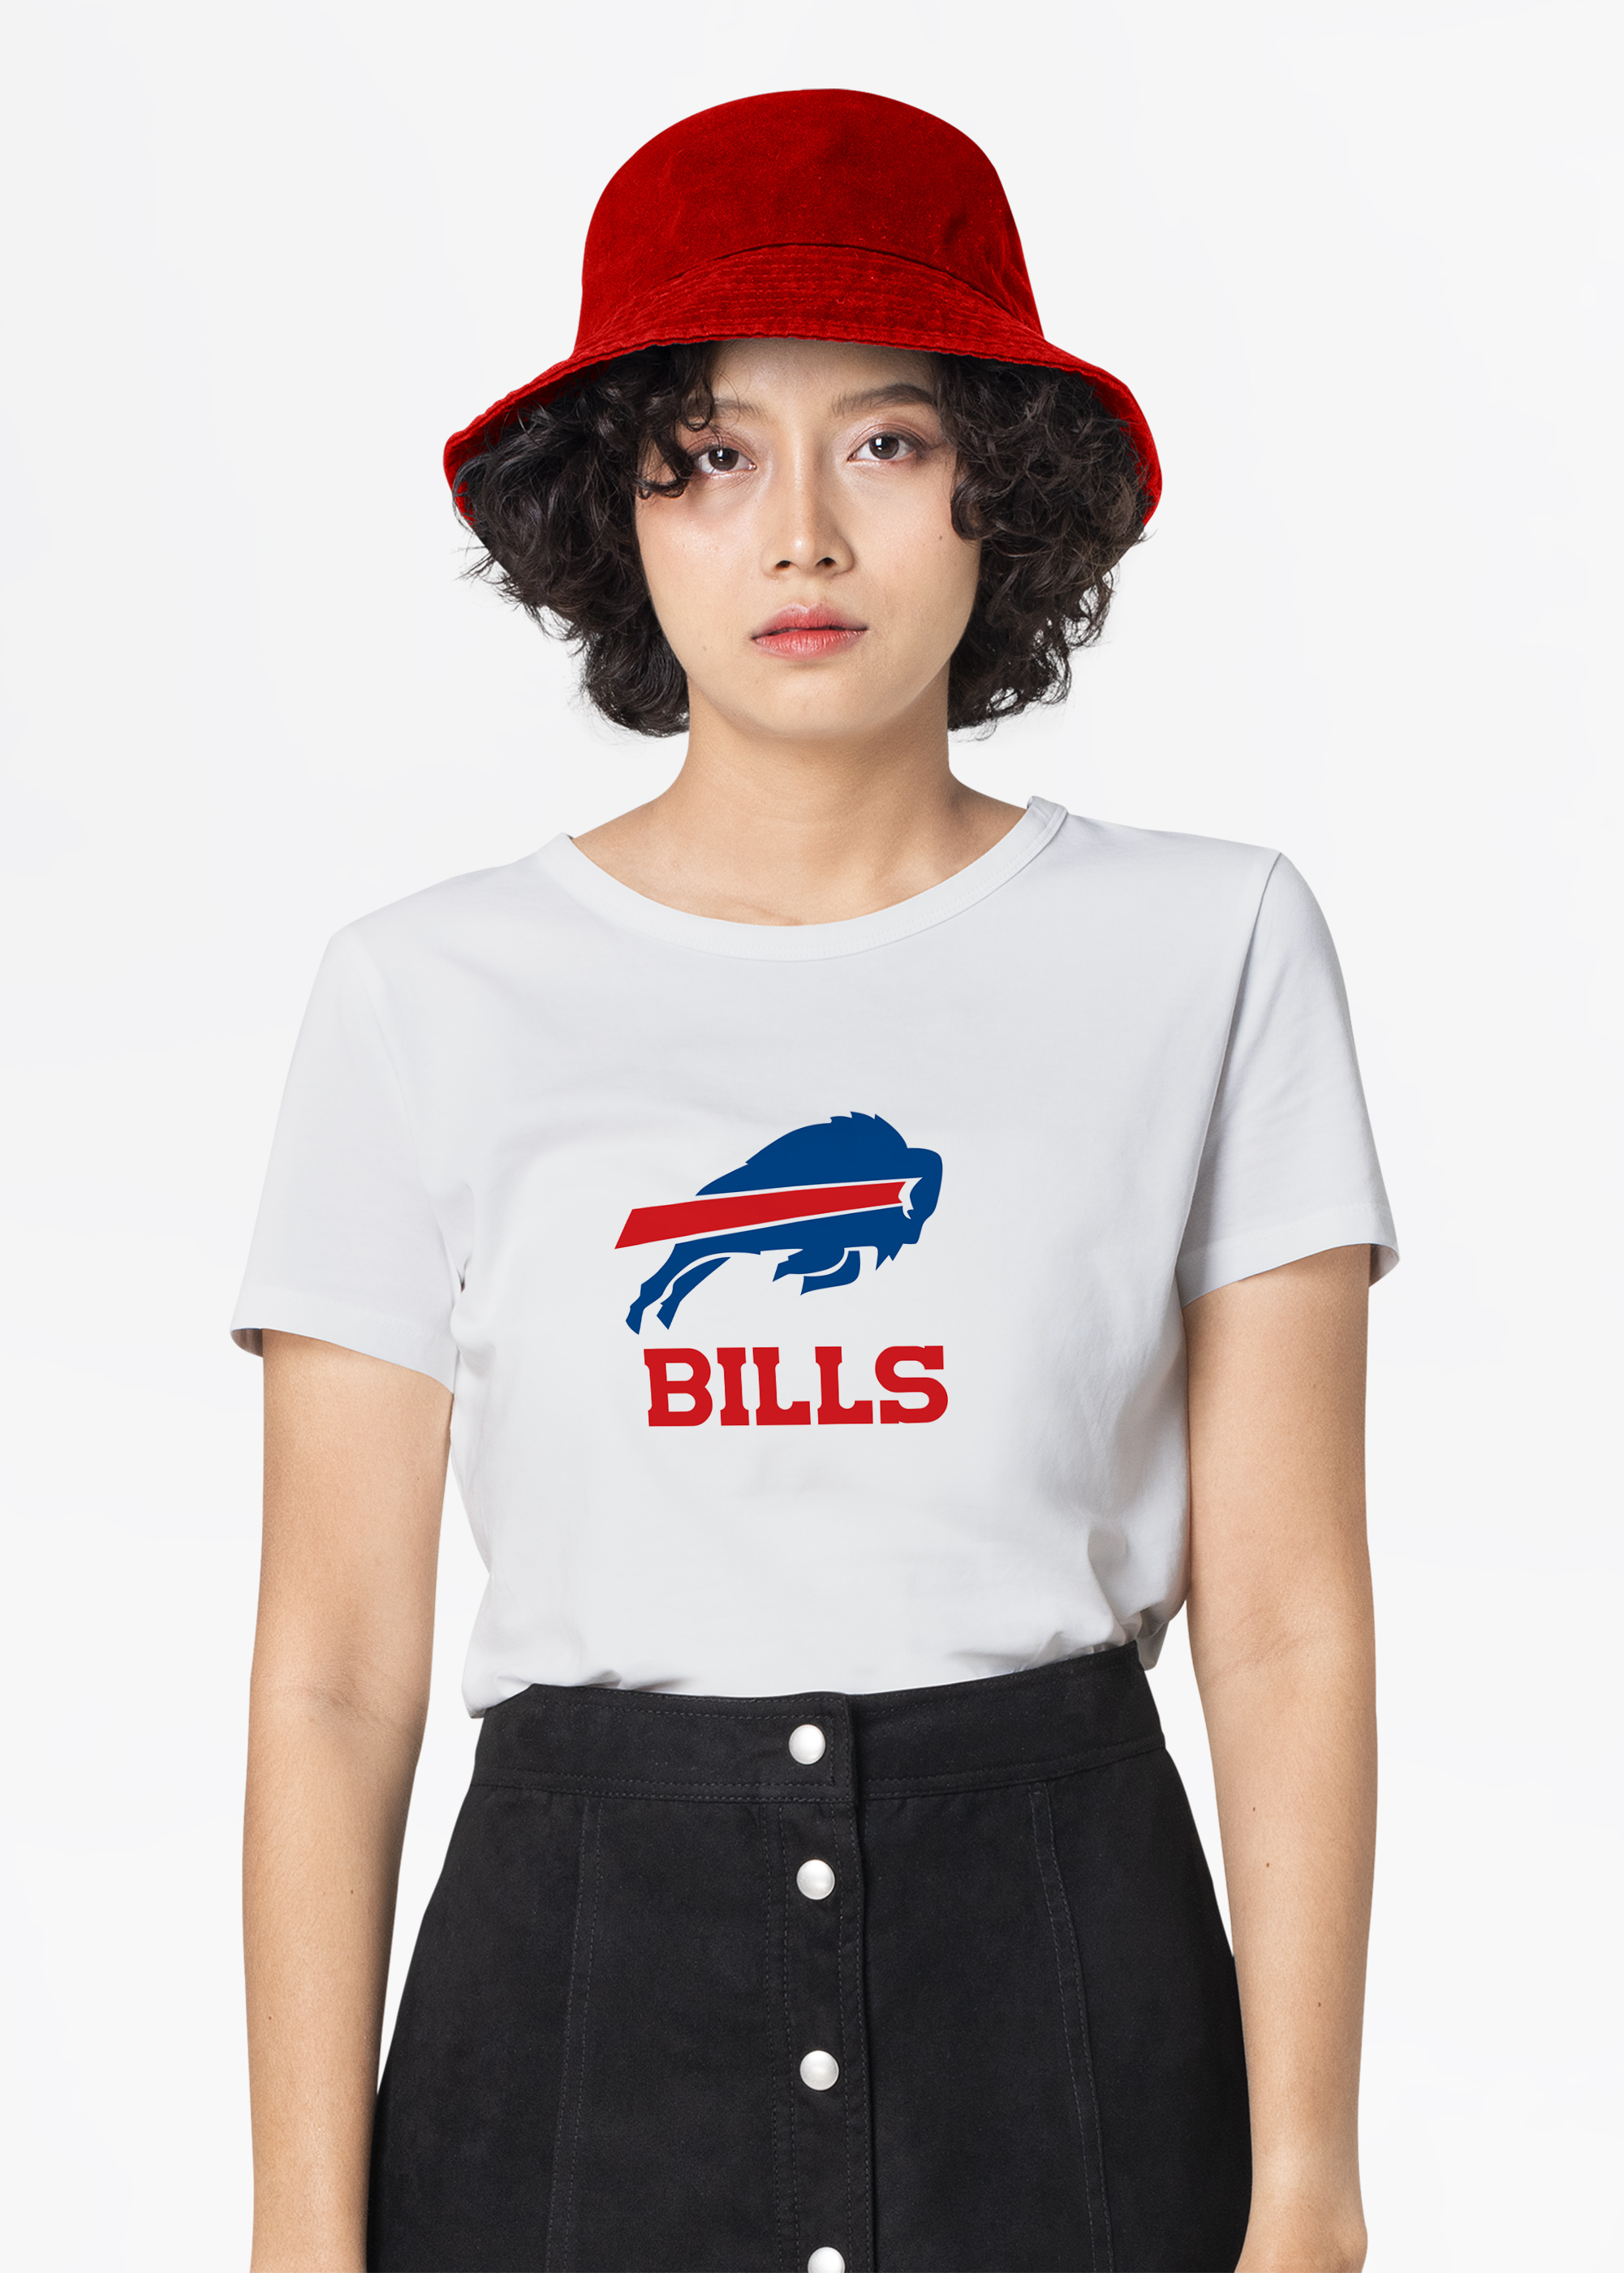 The logo is red and blue on the T-shirt.